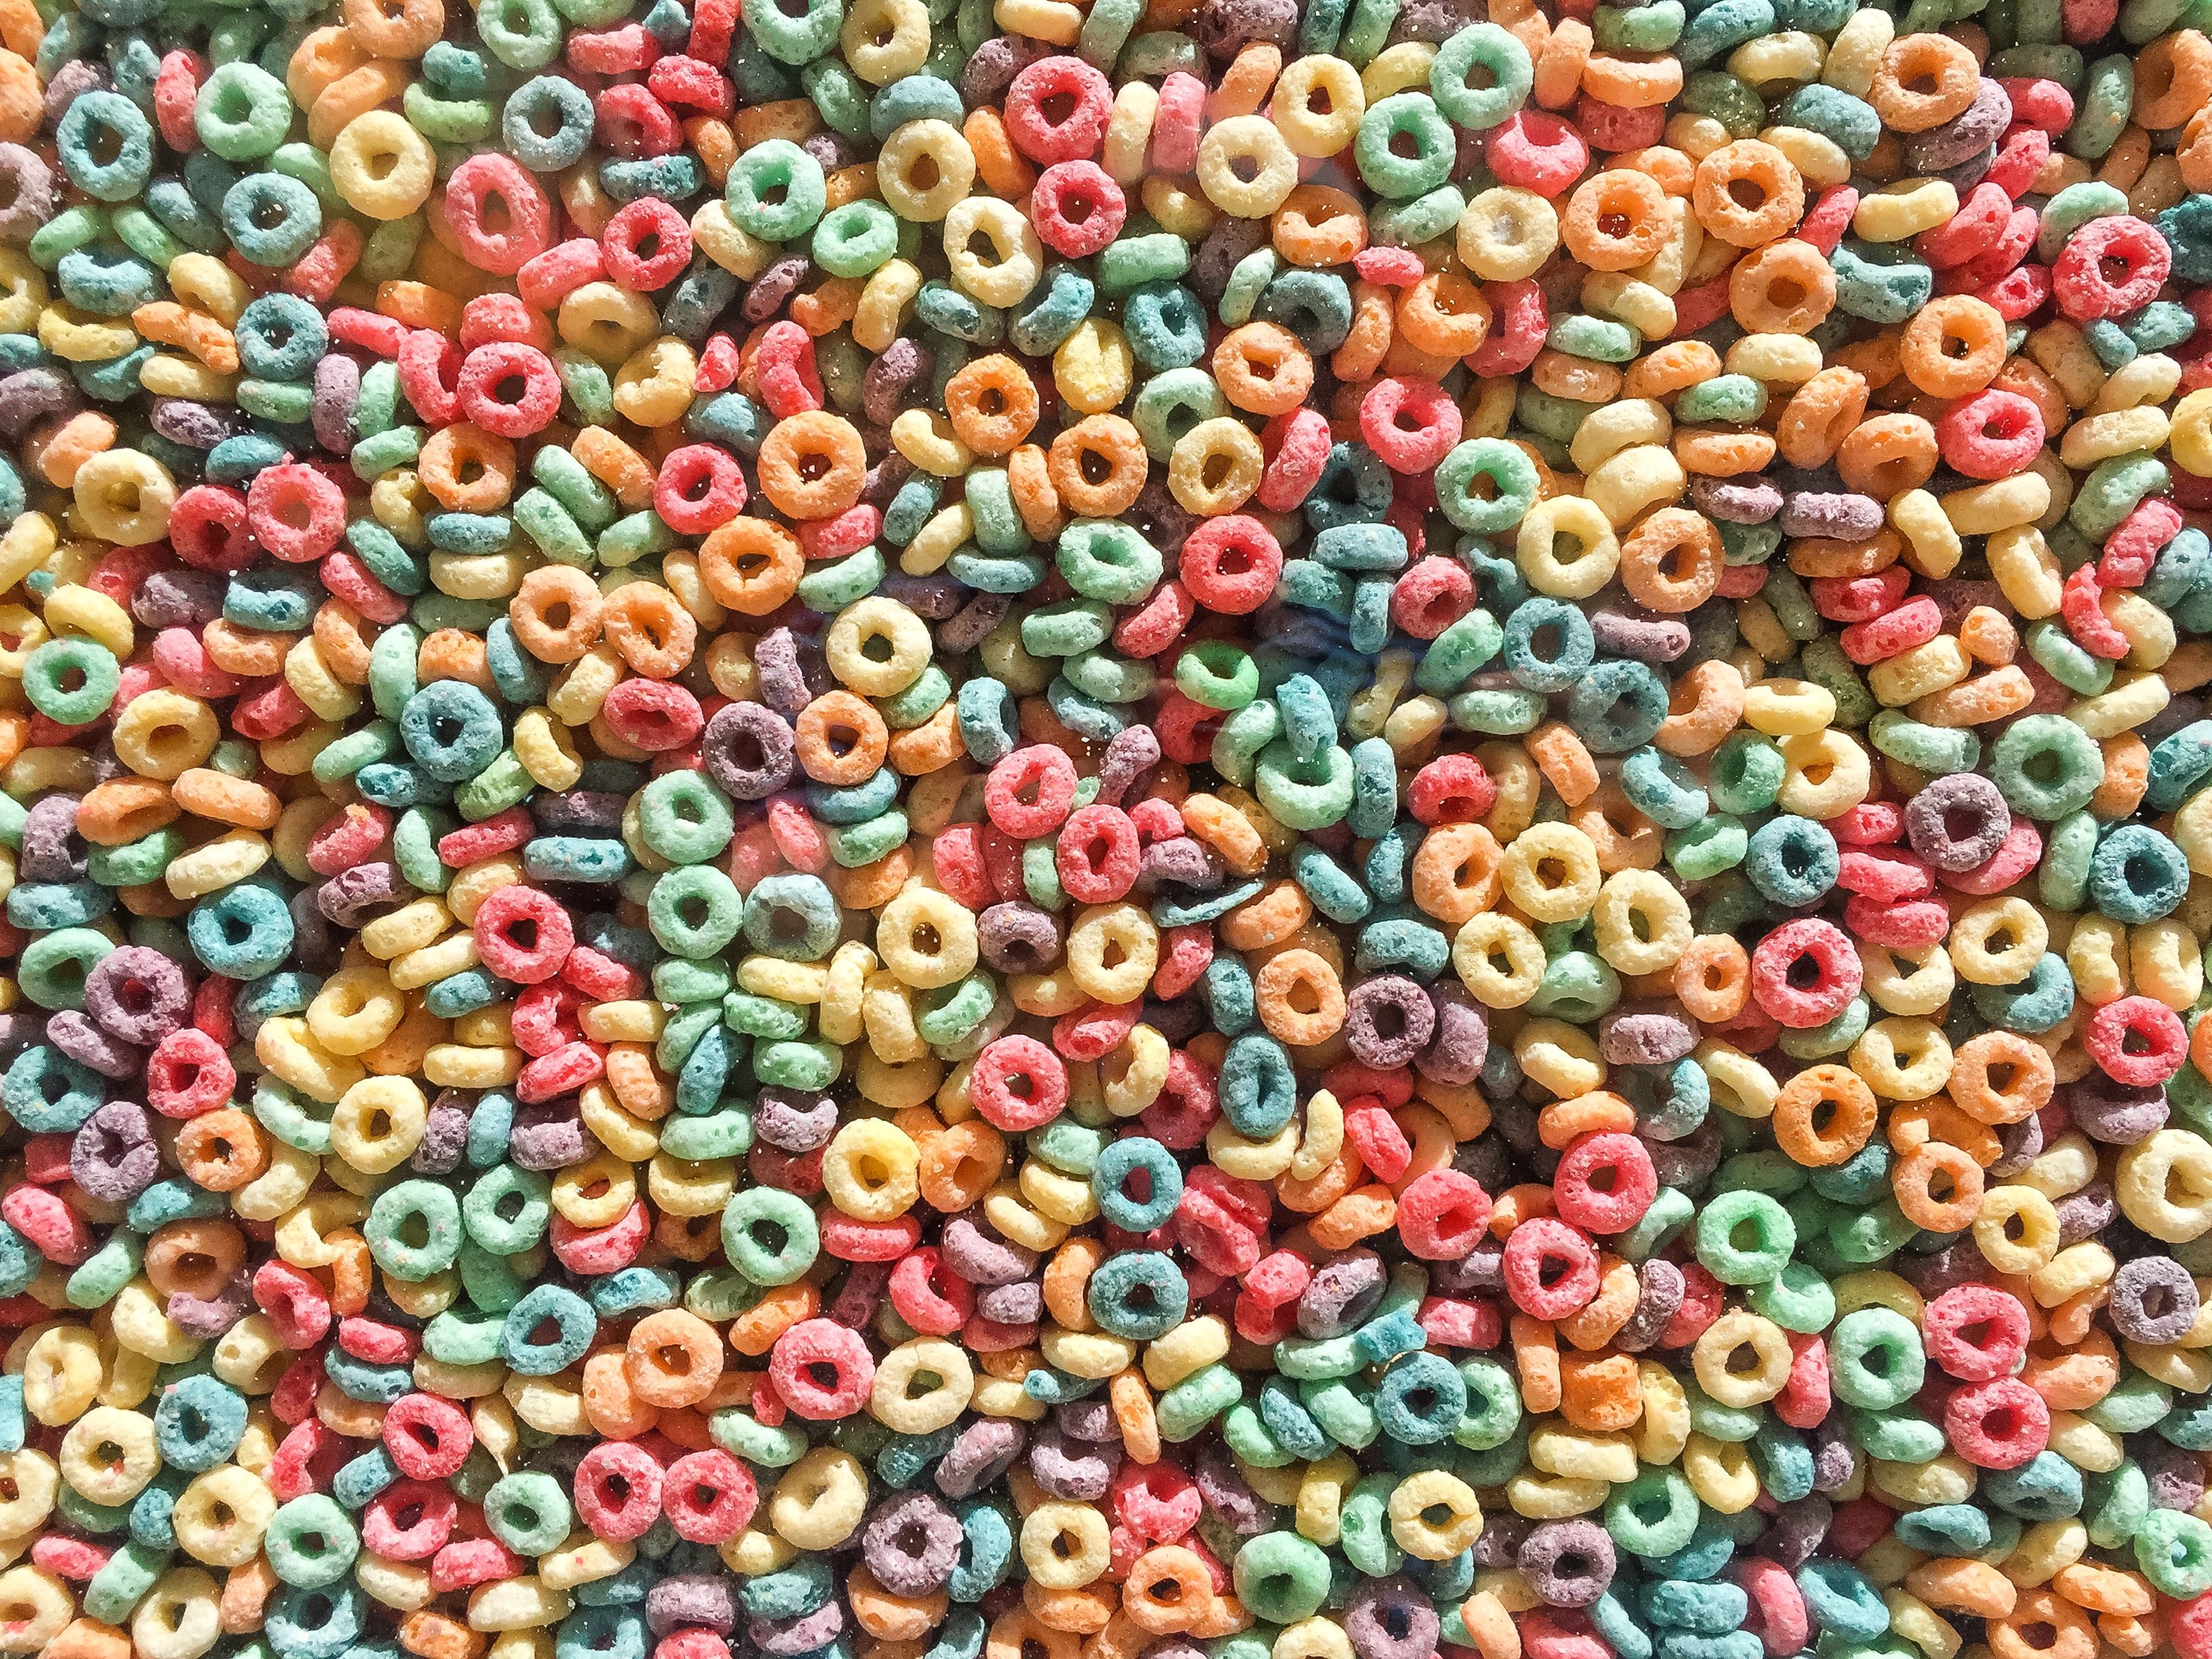 Fruit Loops Picture. Download Free Image